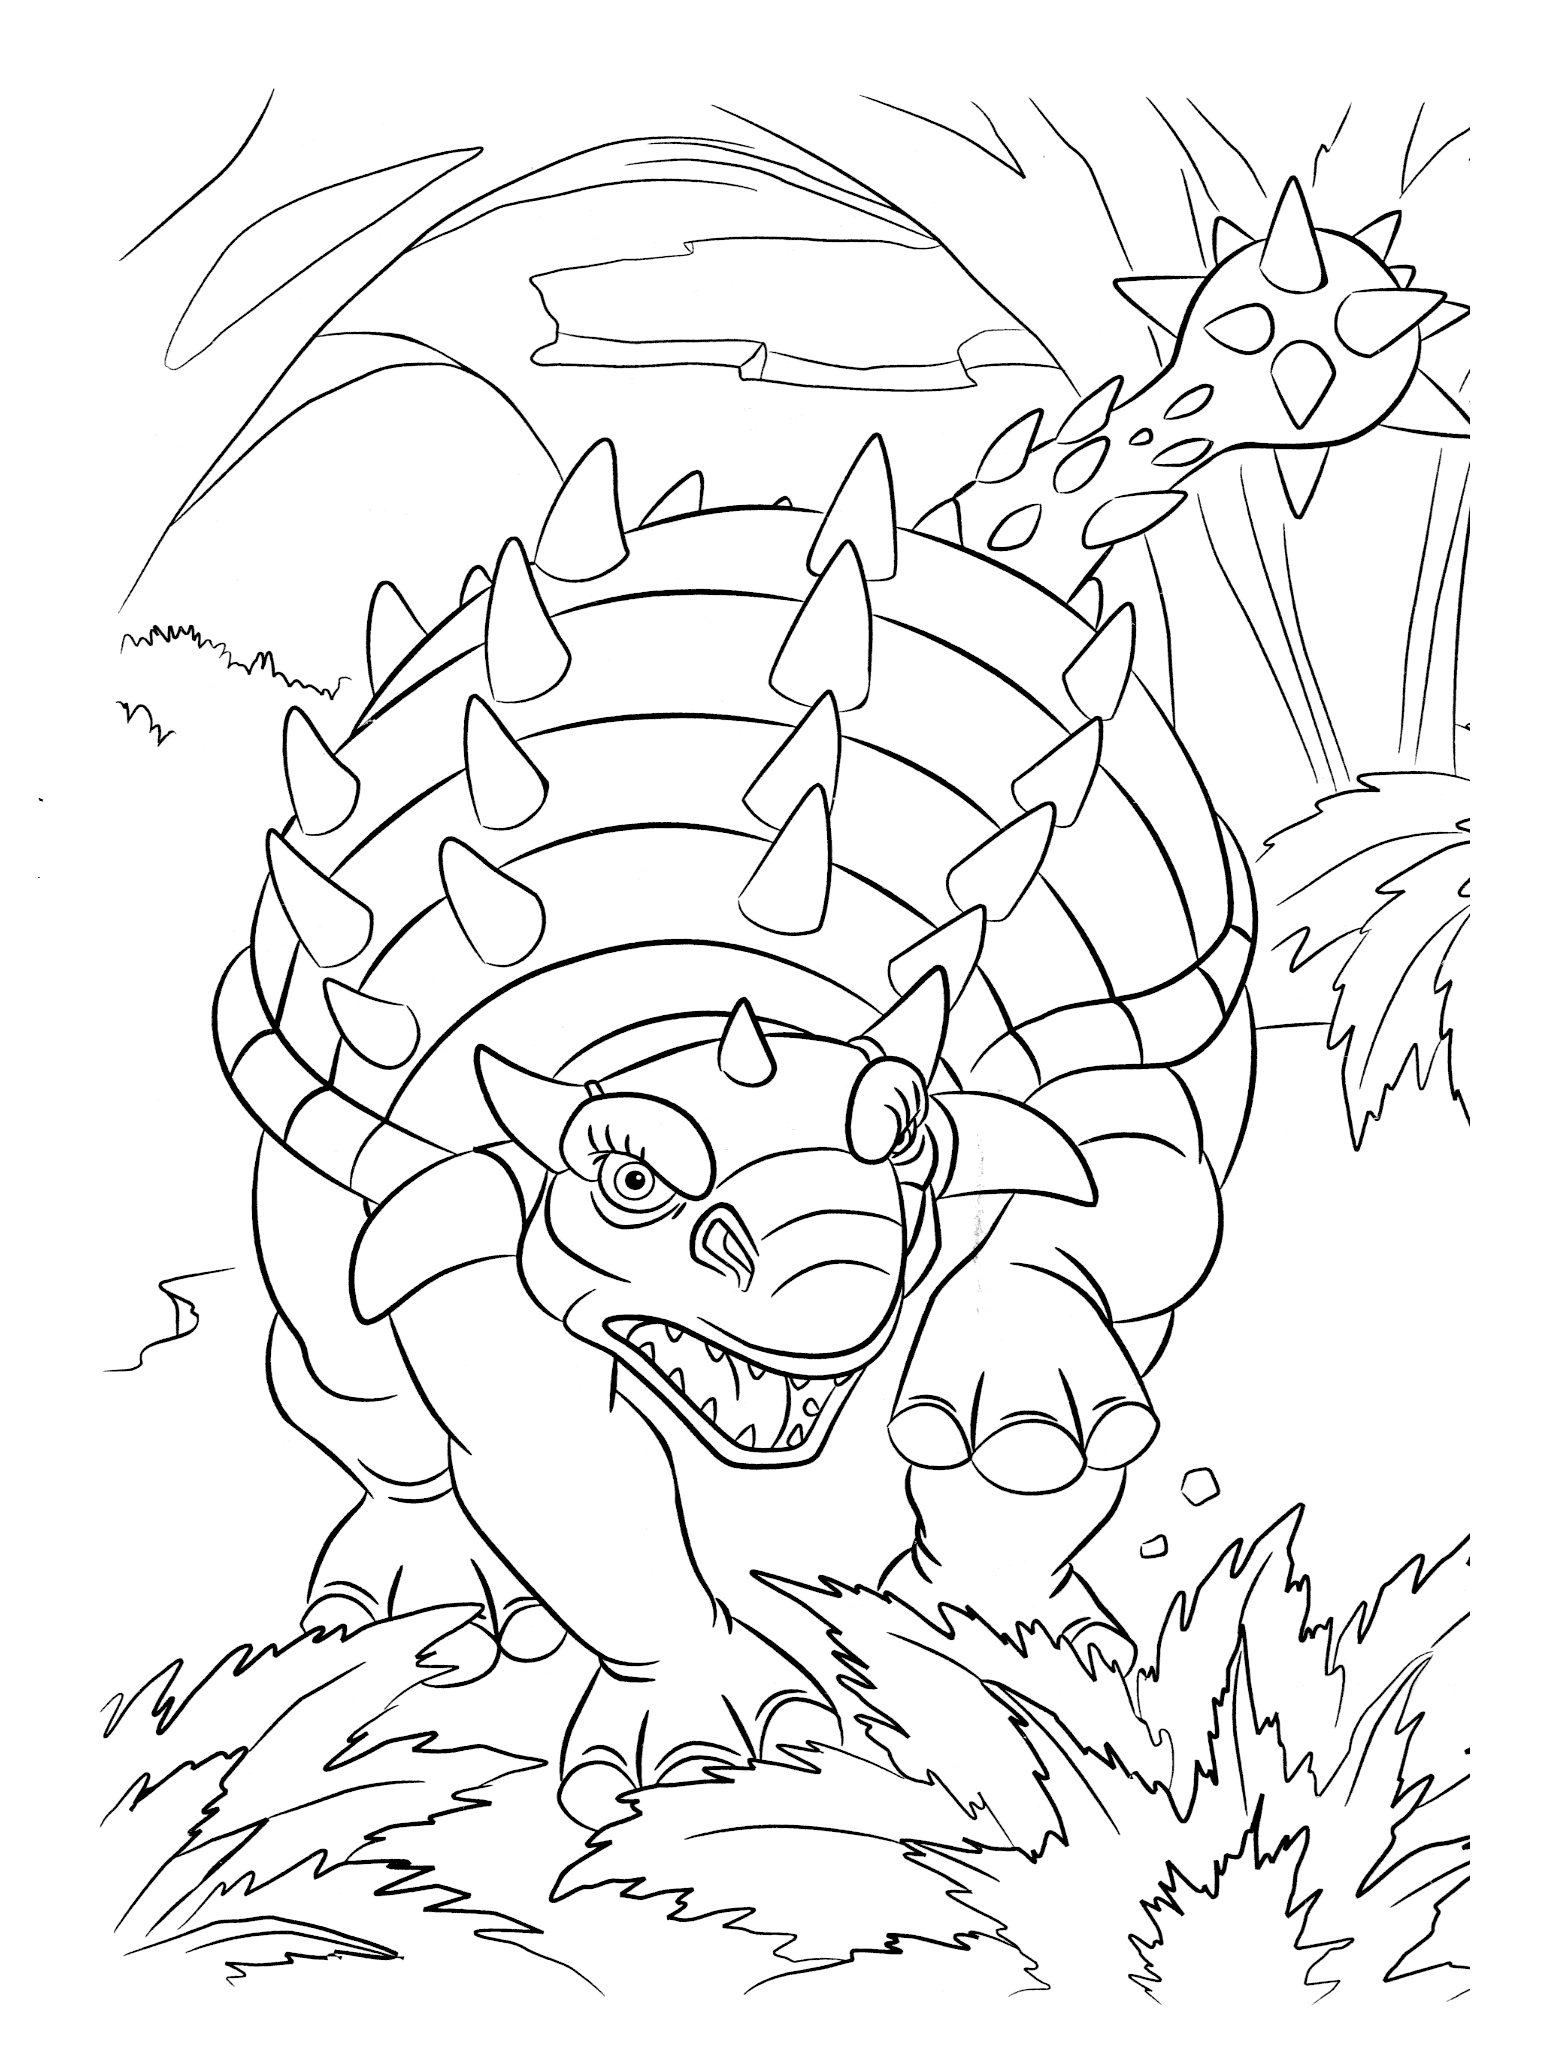 Coloring page - Angry dinosaur